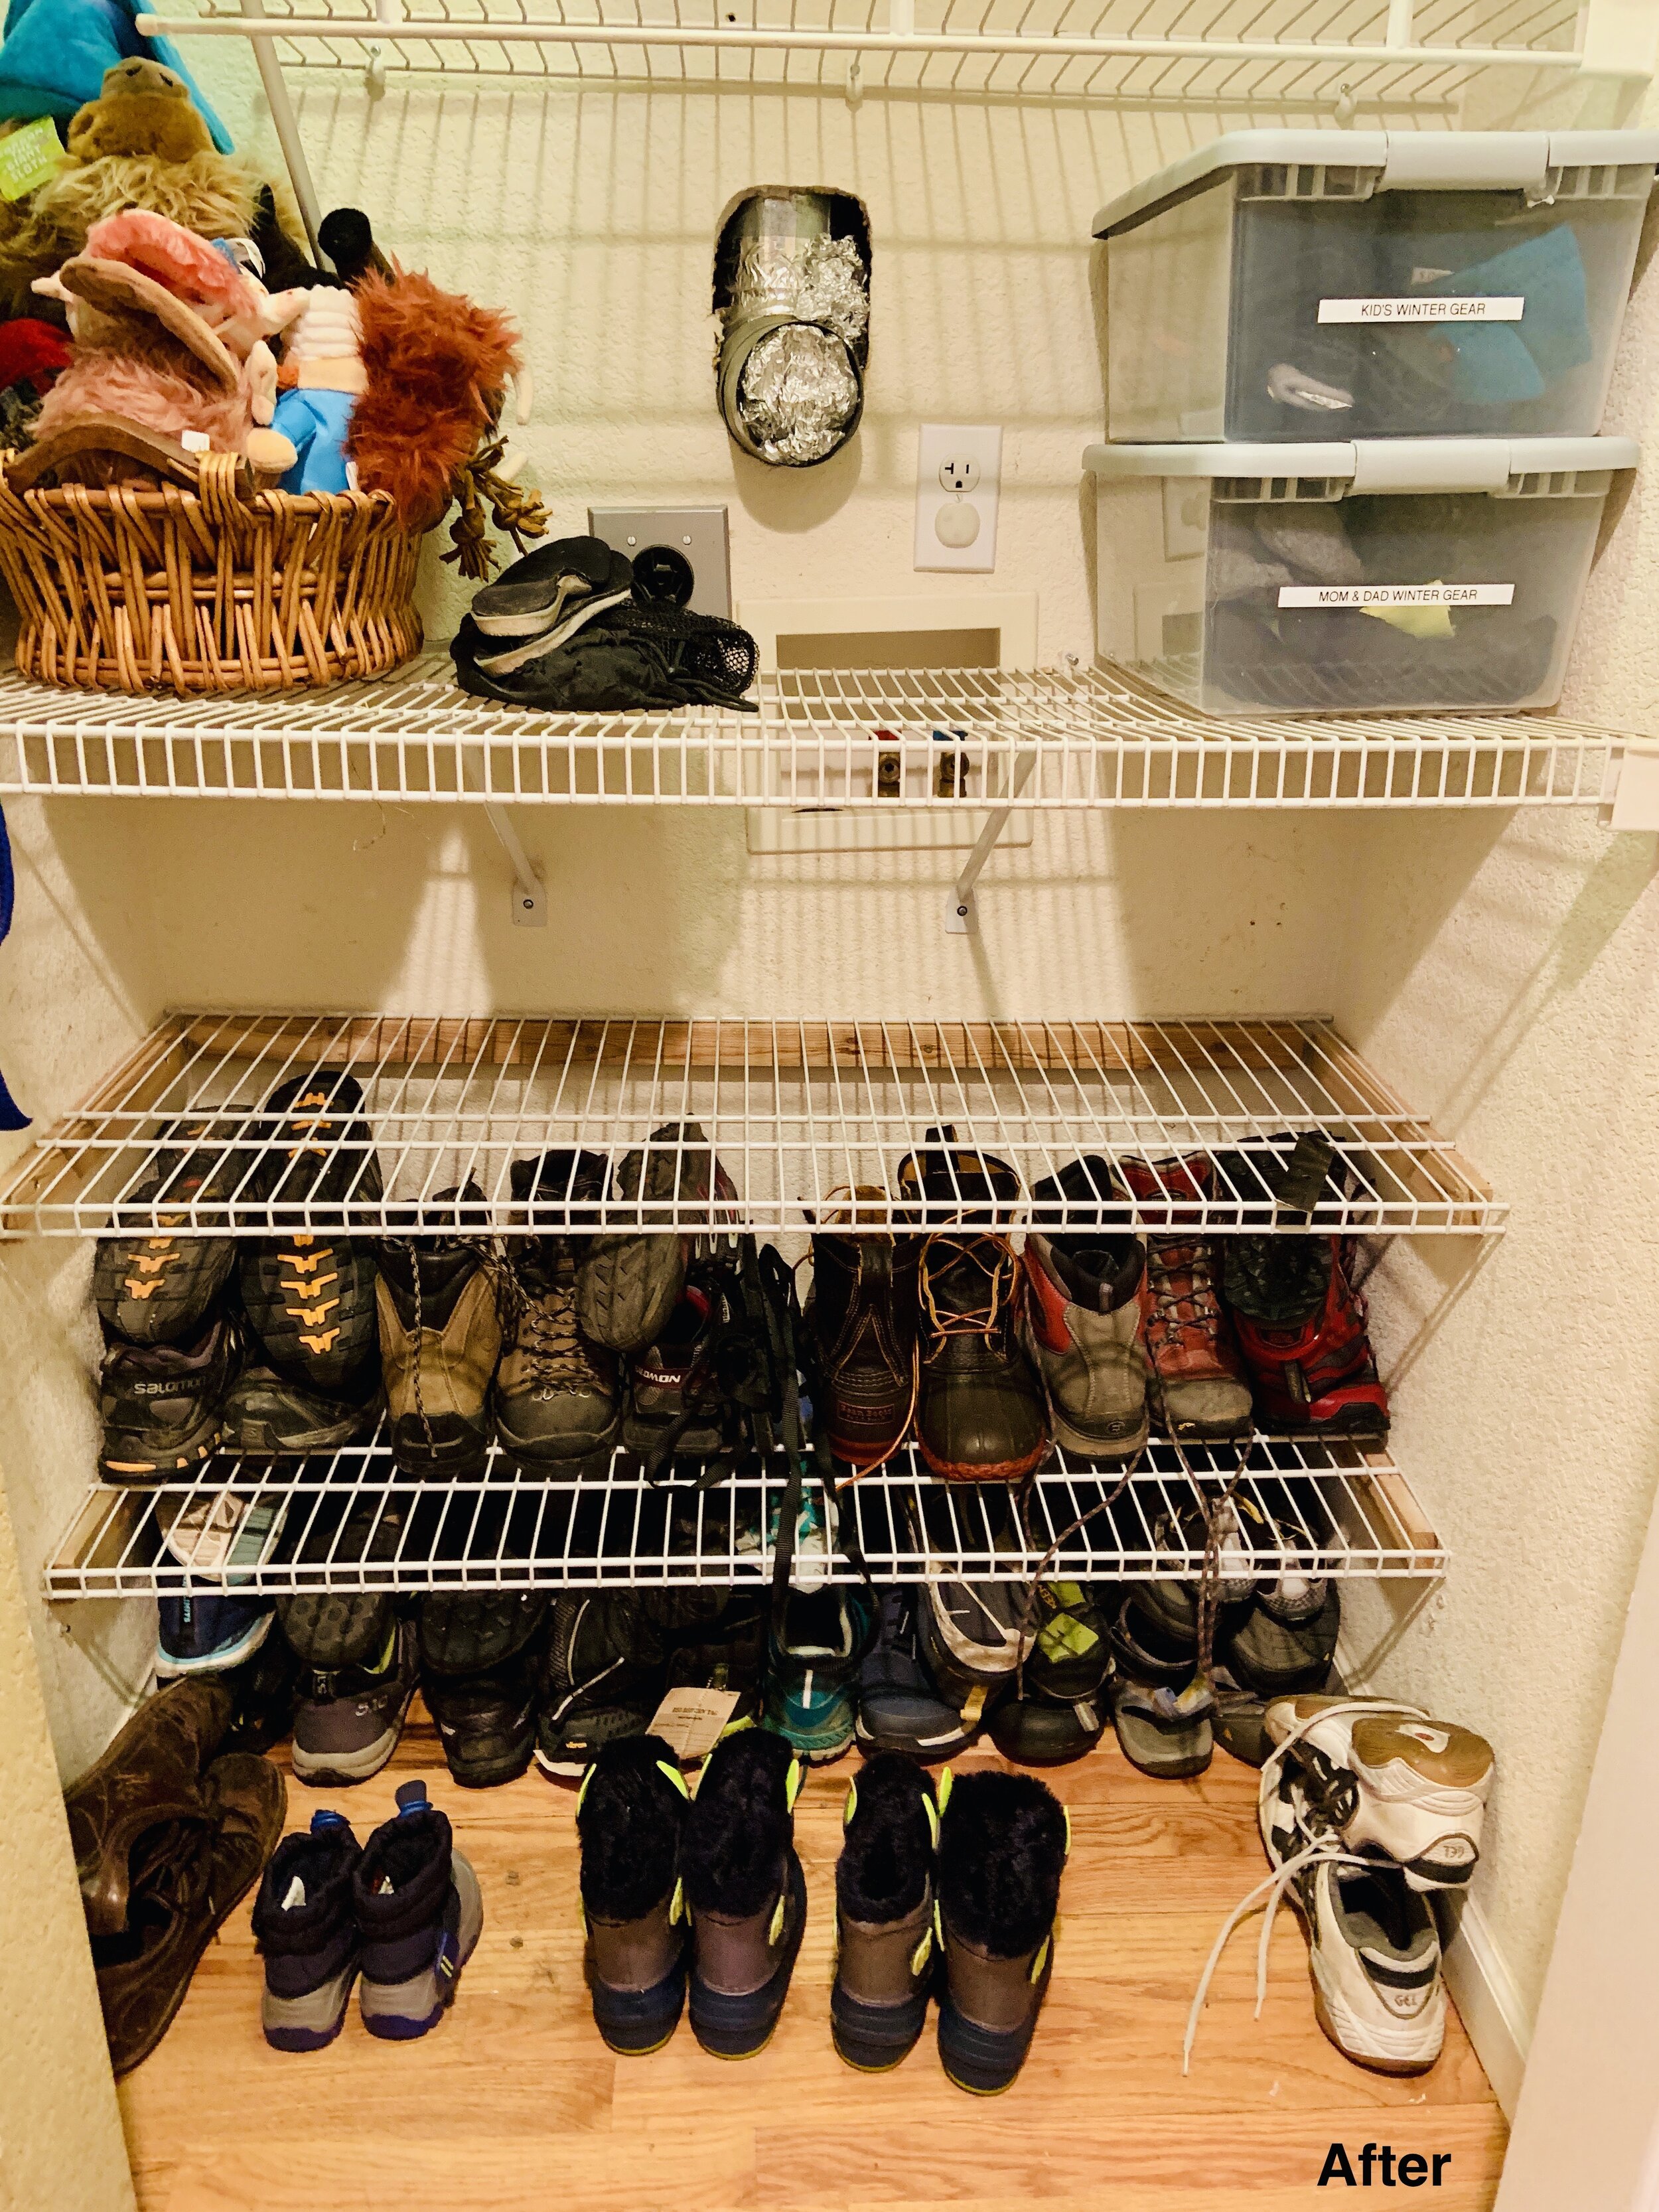 Boulder entryway closer with white wired shelves organized with containers that are labeled, dog toys in basket, shoes on shelves